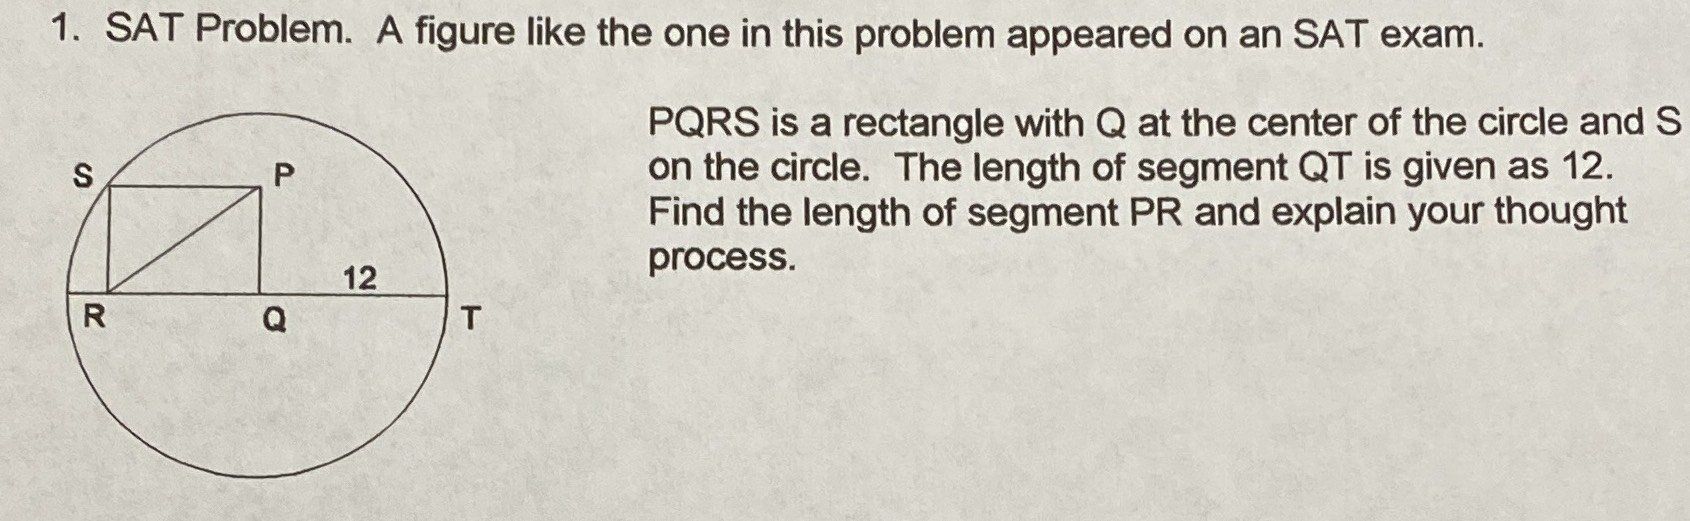 SAT Problem. A figure like the one in this problem...